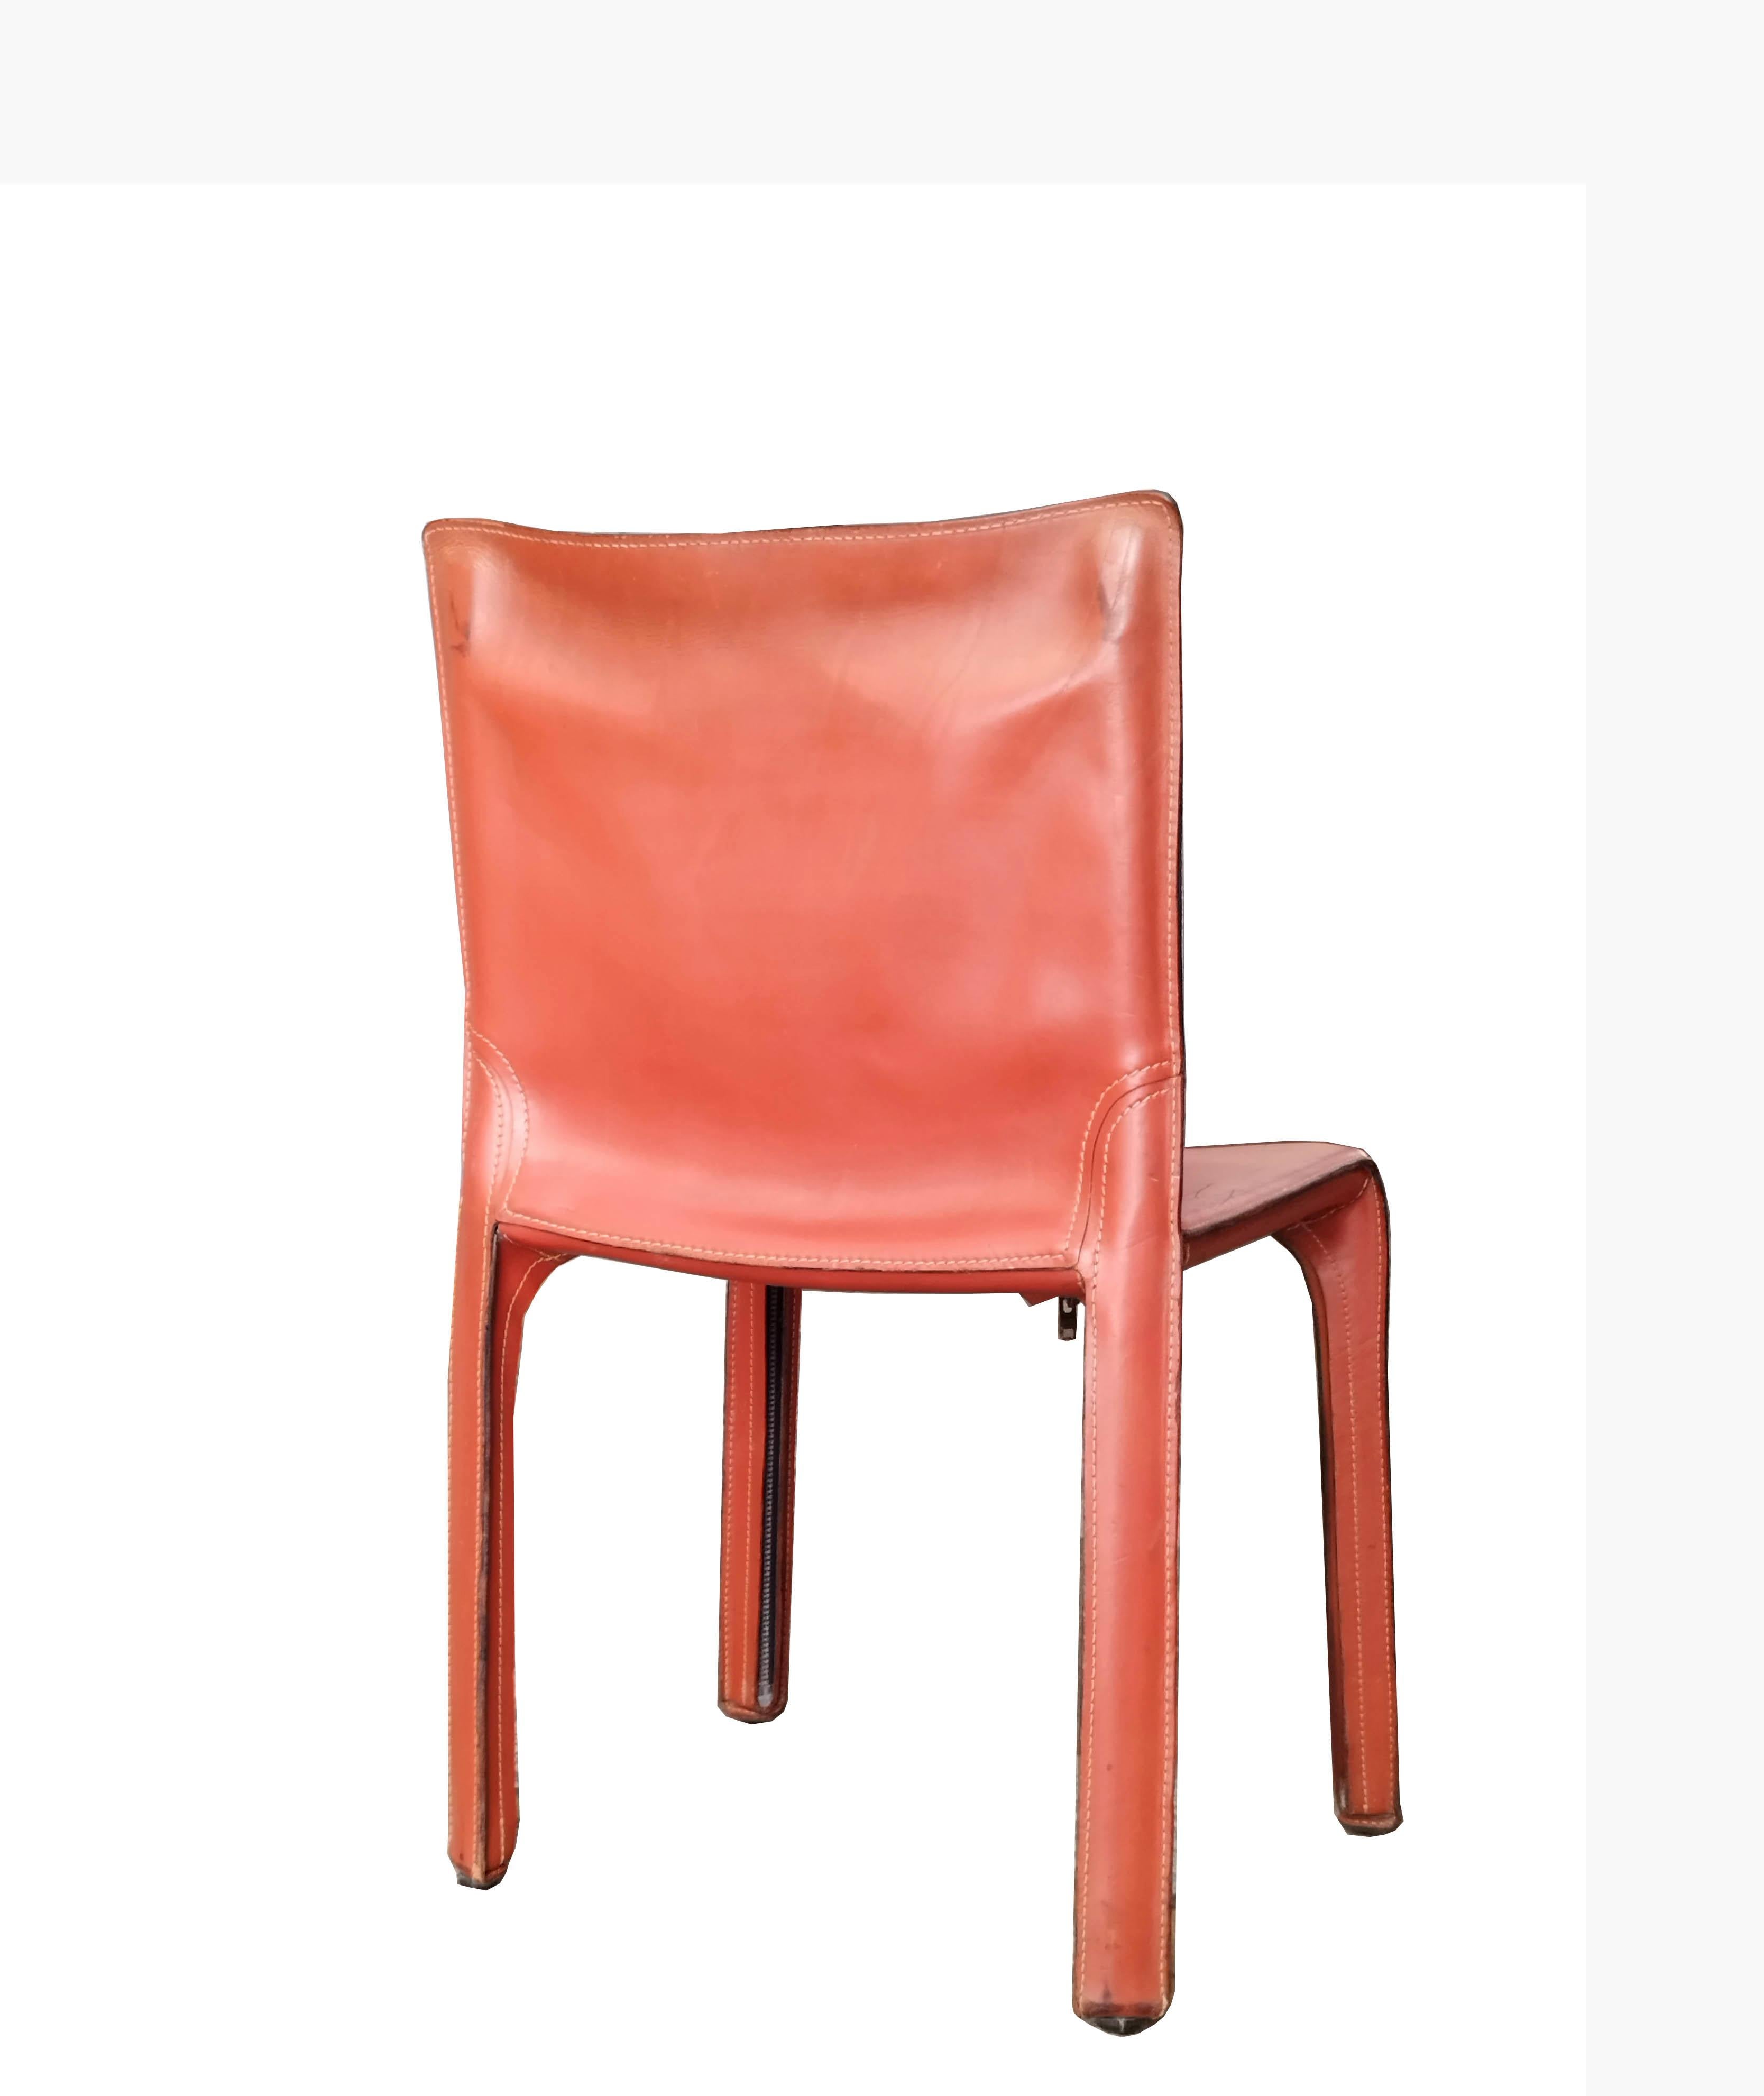 Mid-Century Modern Mario Bellini for Cassina Cab Dining Chair, Italy, 1978